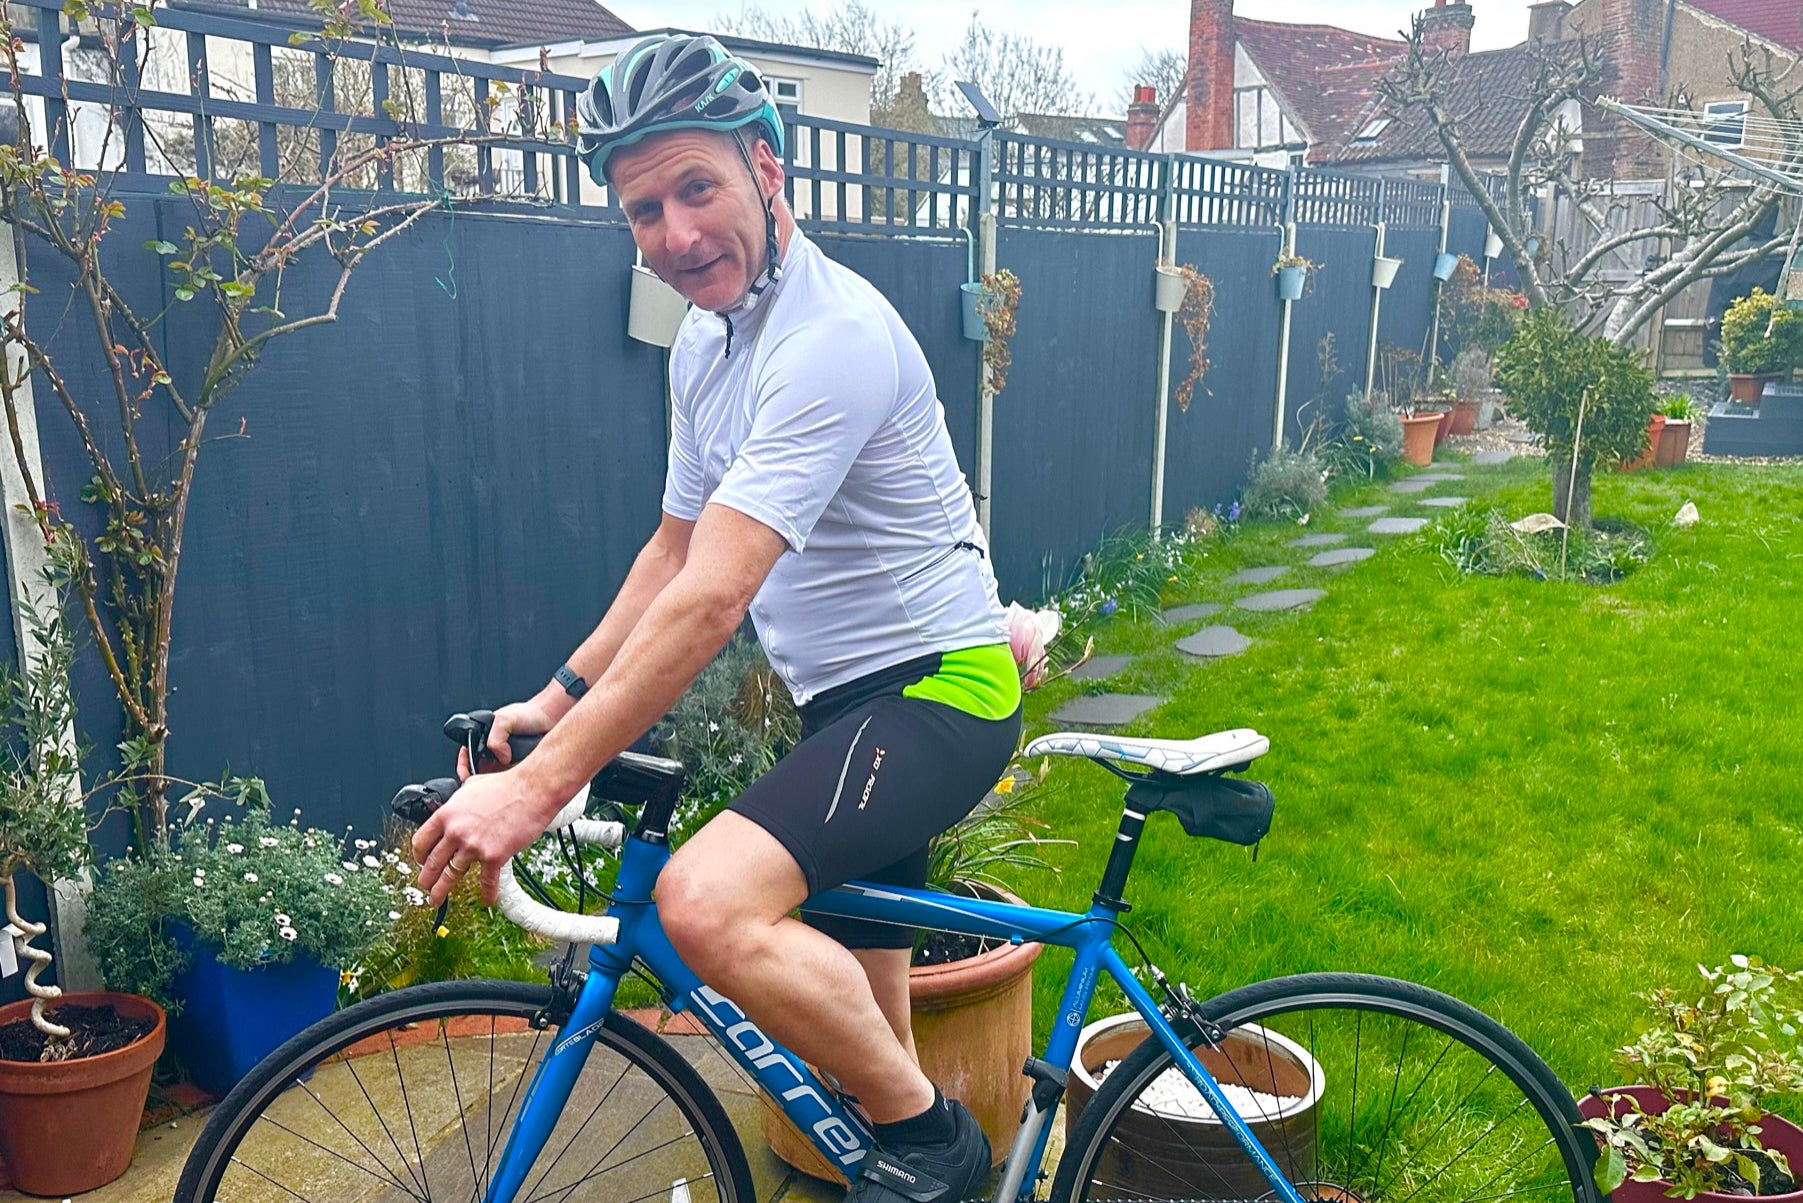 Nick Harding found that exercise, including cycling, helps prevent many problems that middle-aged men think are inevitable